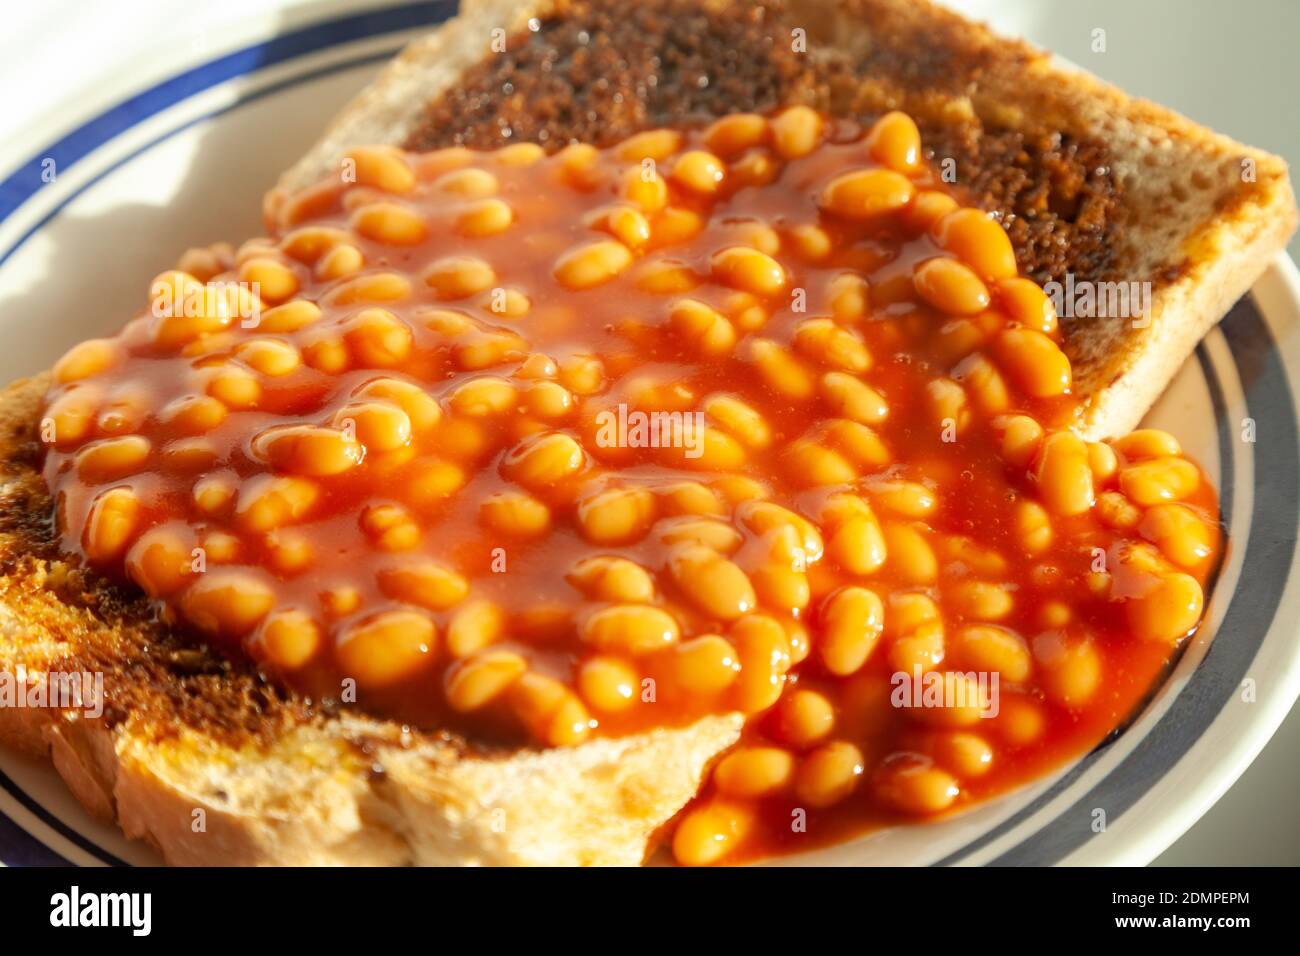 A close up of baked beans on toast. Stock Photo